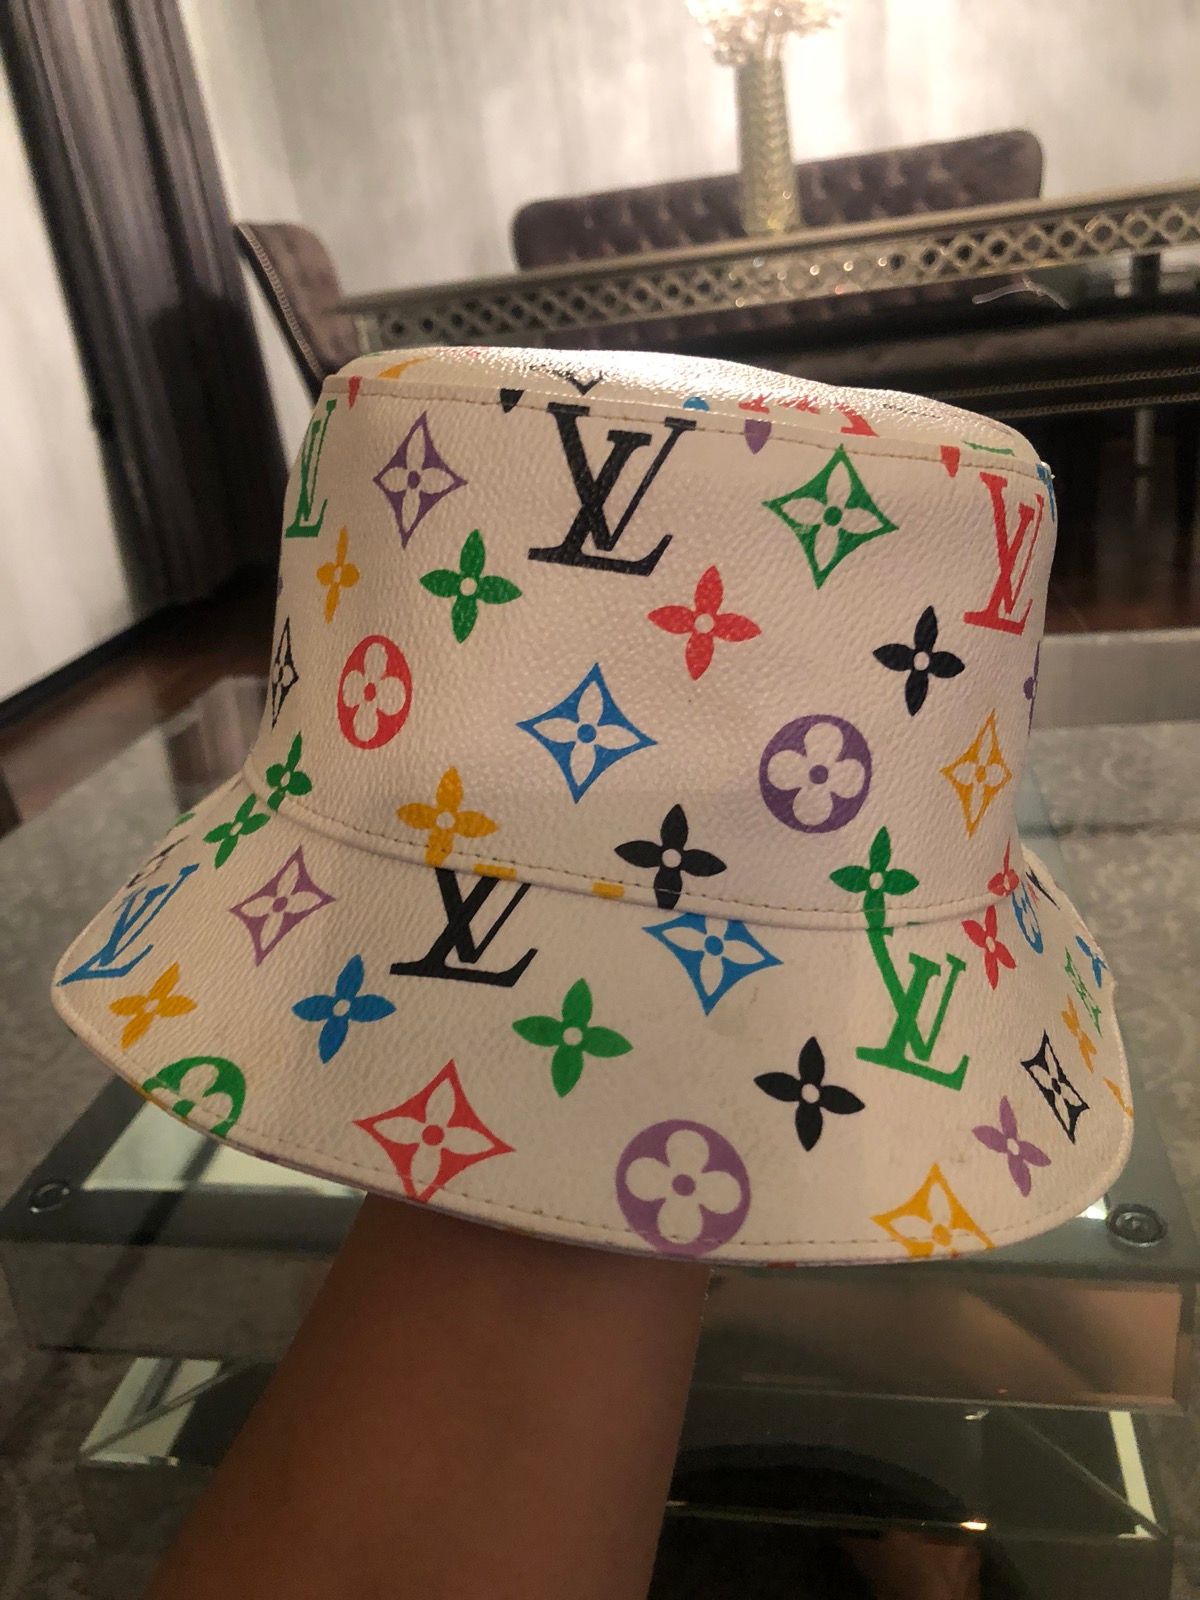 Louis Vuitton Bucket Hat White - For Sale on 1stDibs  white louis vuitton  bucket hat, lv bucket hat white, louis vuitton vissershoed